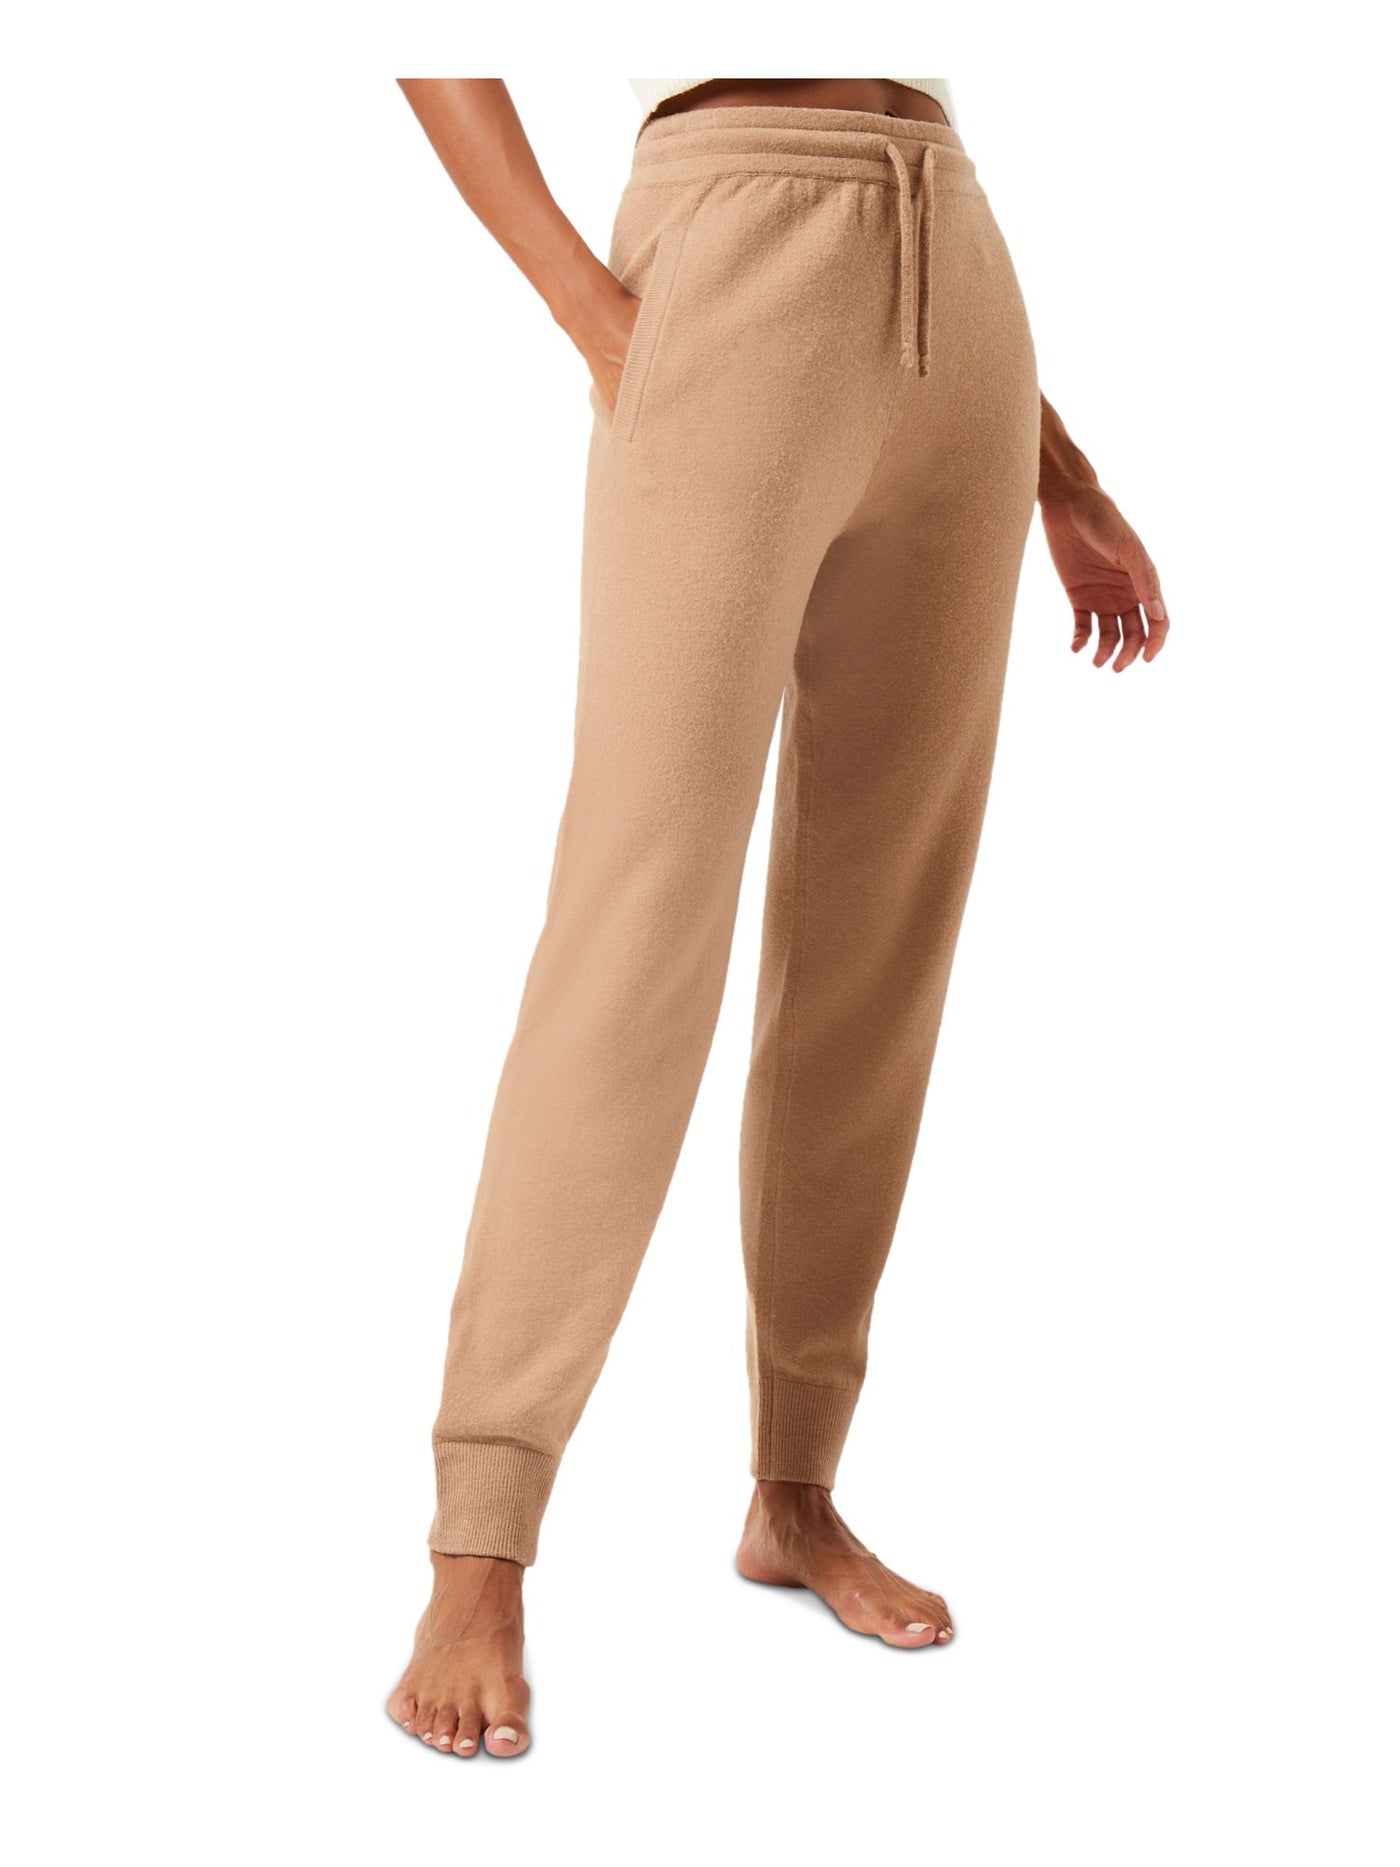 FRENCH CONNECTION Womens Brown Pocketed Tie Banded Hems Rib Trim Lounge Pants L